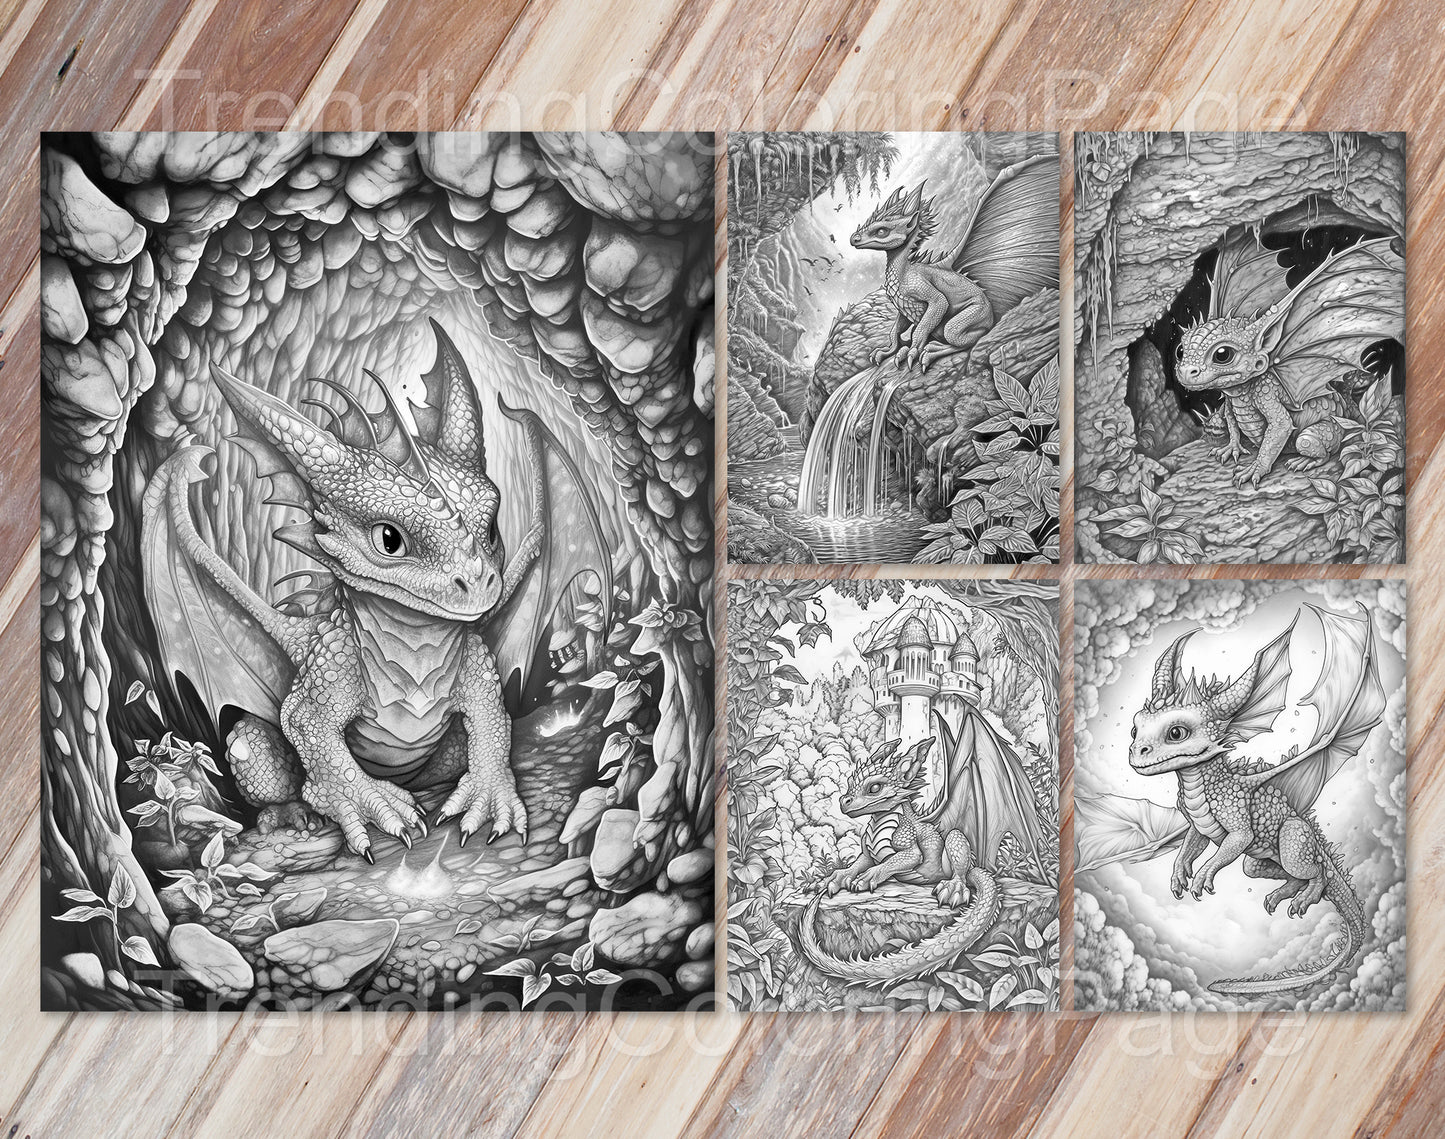 25 Dragonling Dreams Grayscale Coloring Pages - Instant Download - Printable Dark/Light